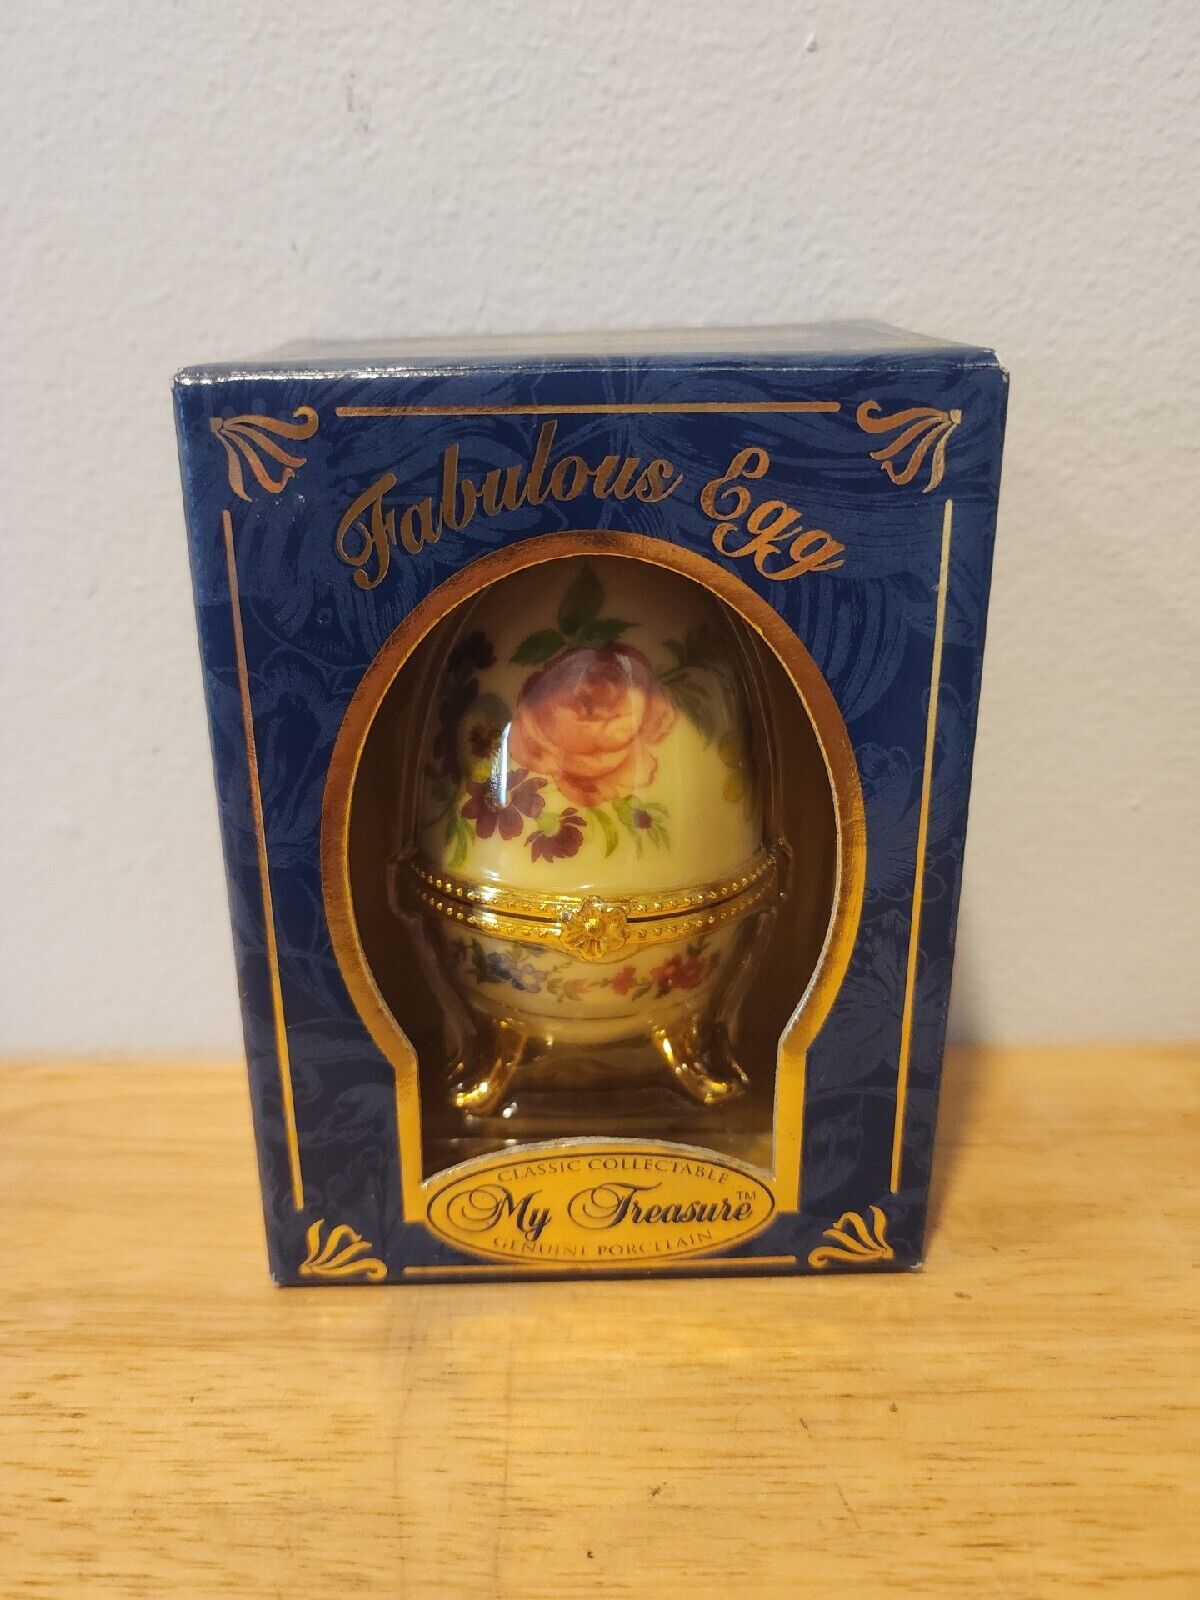 My Treasure Fabulous Egg Genuine Porcelain Hand Painted/Classic Collectible